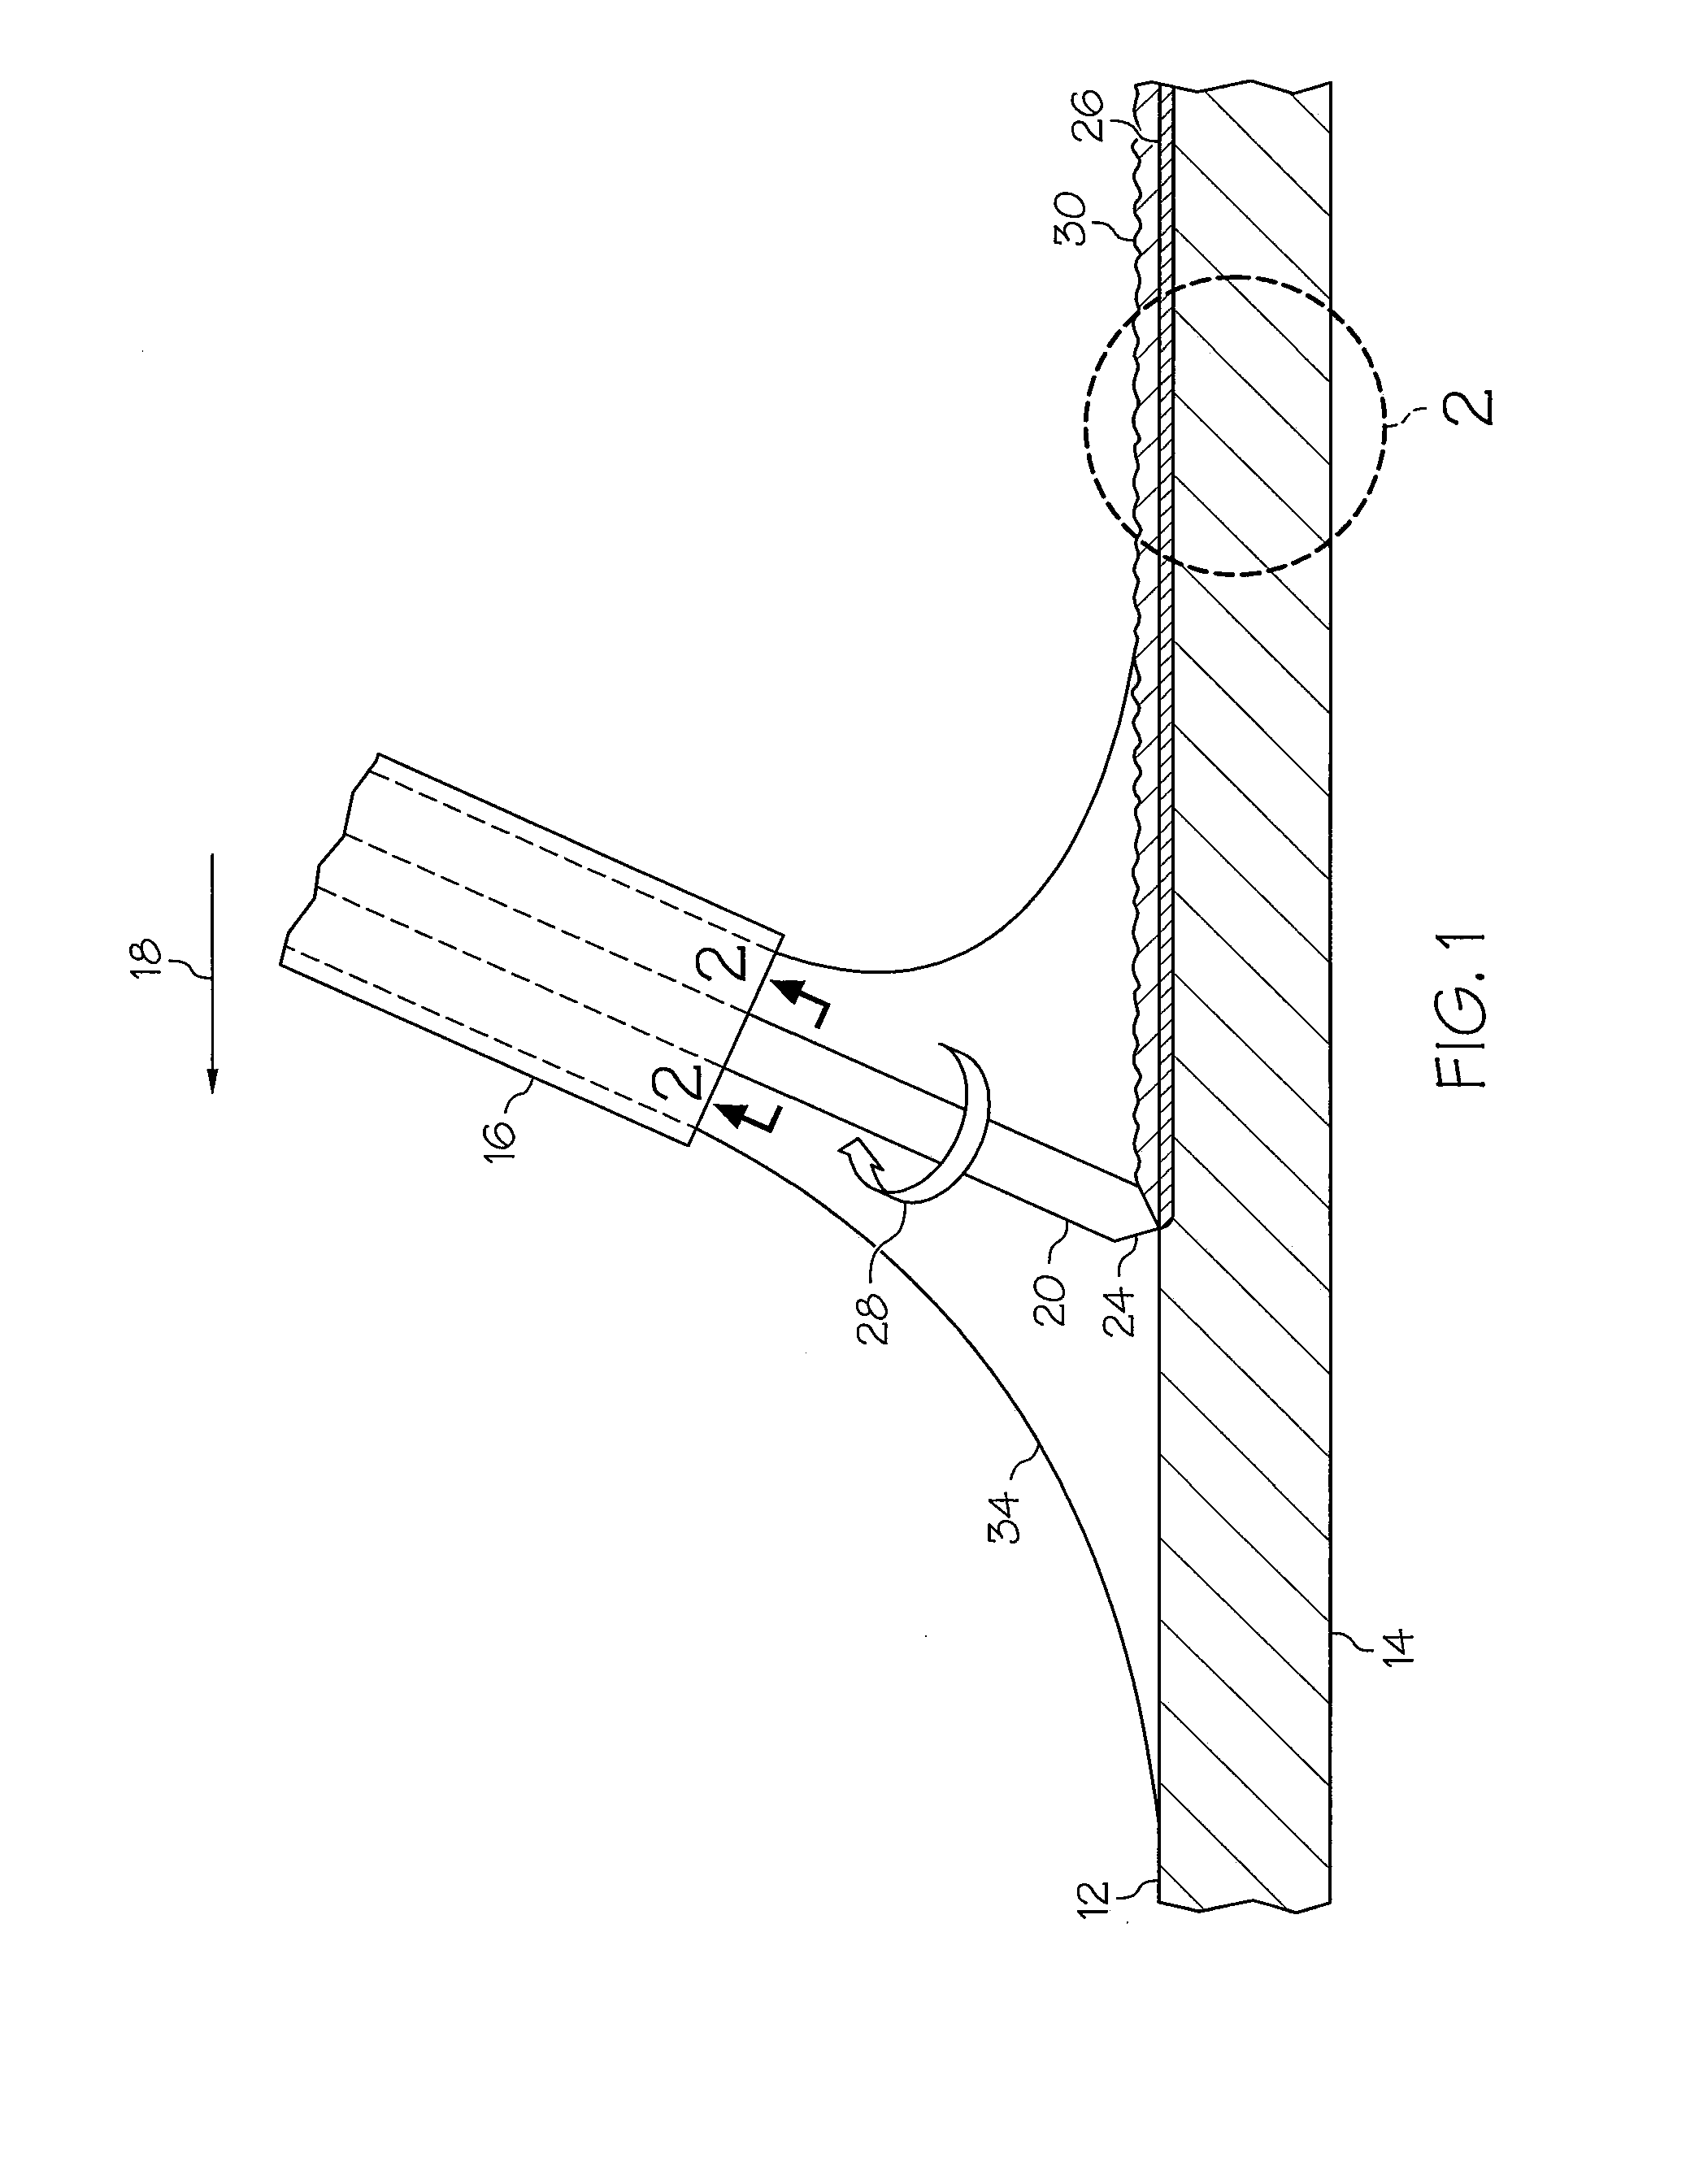 Coating/repairing process using electrospark with psp rod